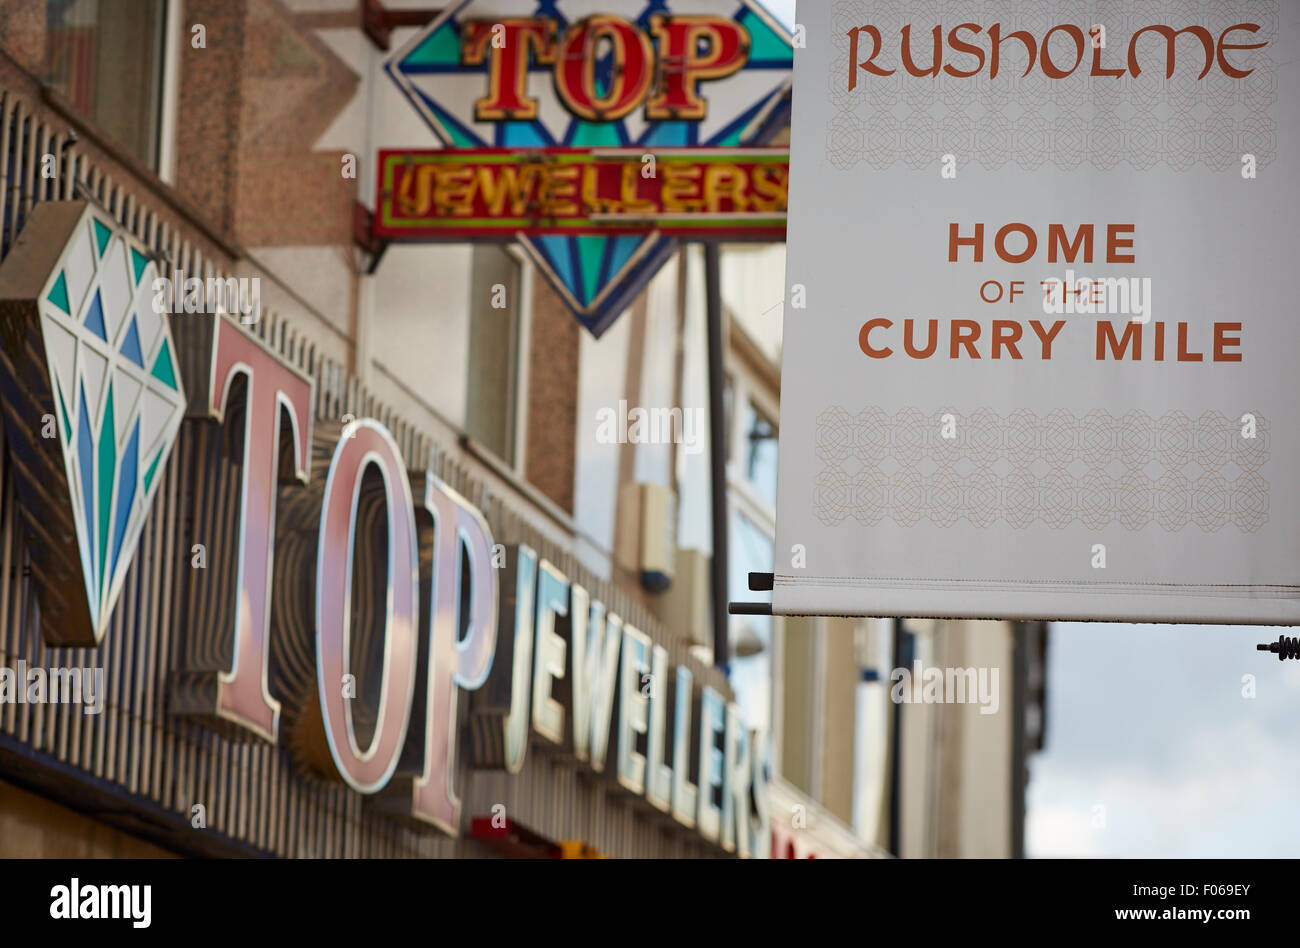 Rusholme A34 curry mile in Manchester Uk   First bus 42 route  cycling on road bike cyclist Shop shopping shopper store retail s Stock Photo